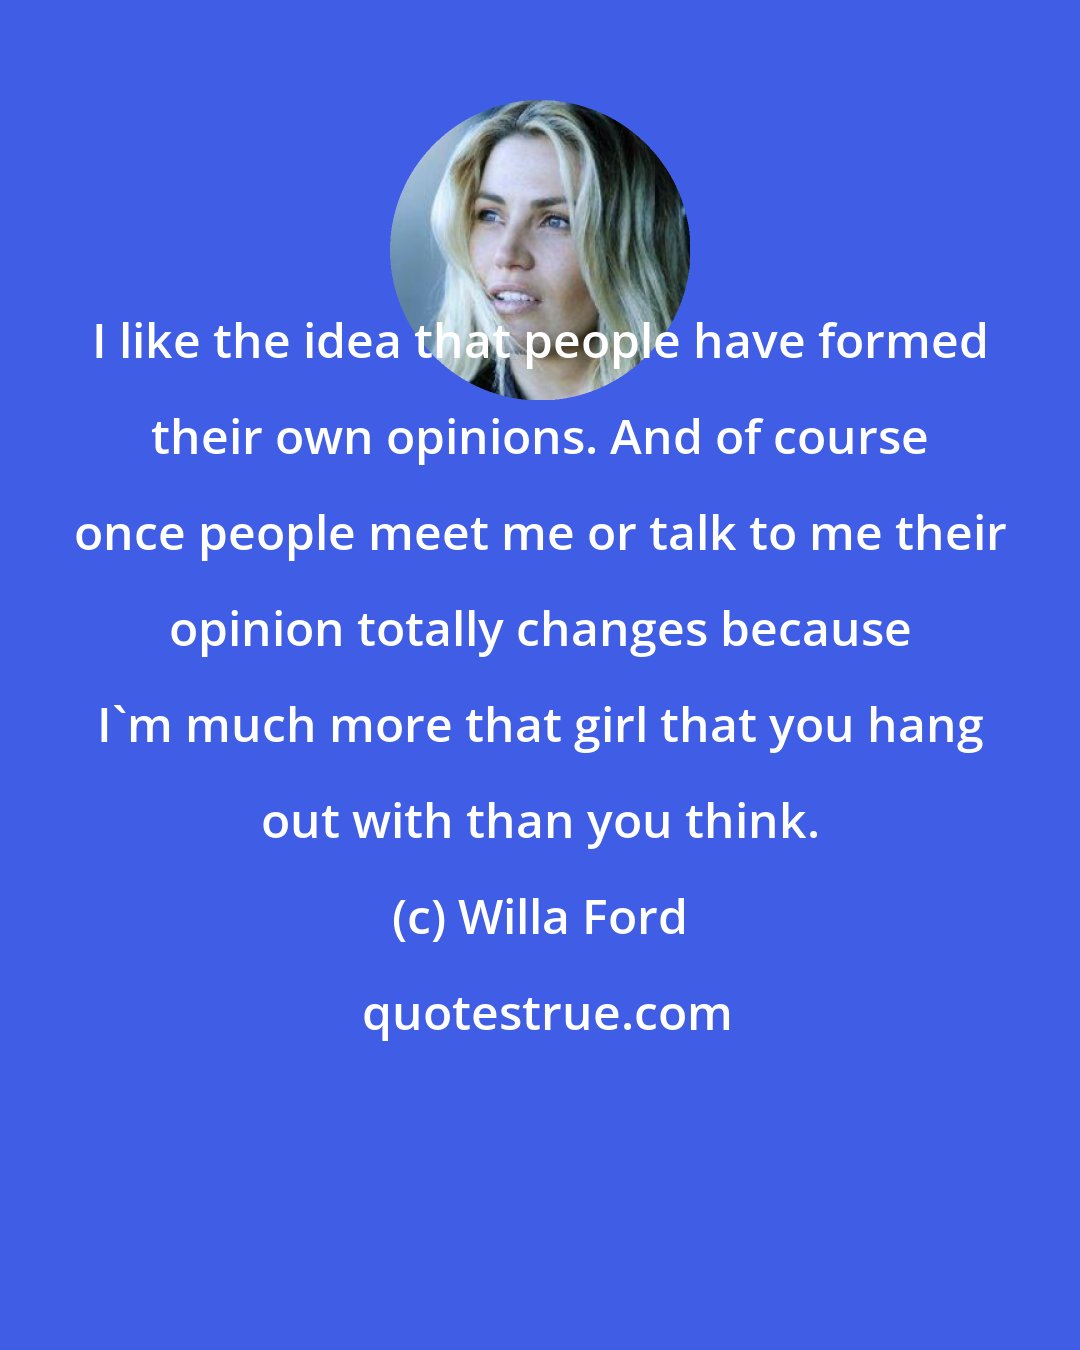 Willa Ford: I like the idea that people have formed their own opinions. And of course once people meet me or talk to me their opinion totally changes because I'm much more that girl that you hang out with than you think.